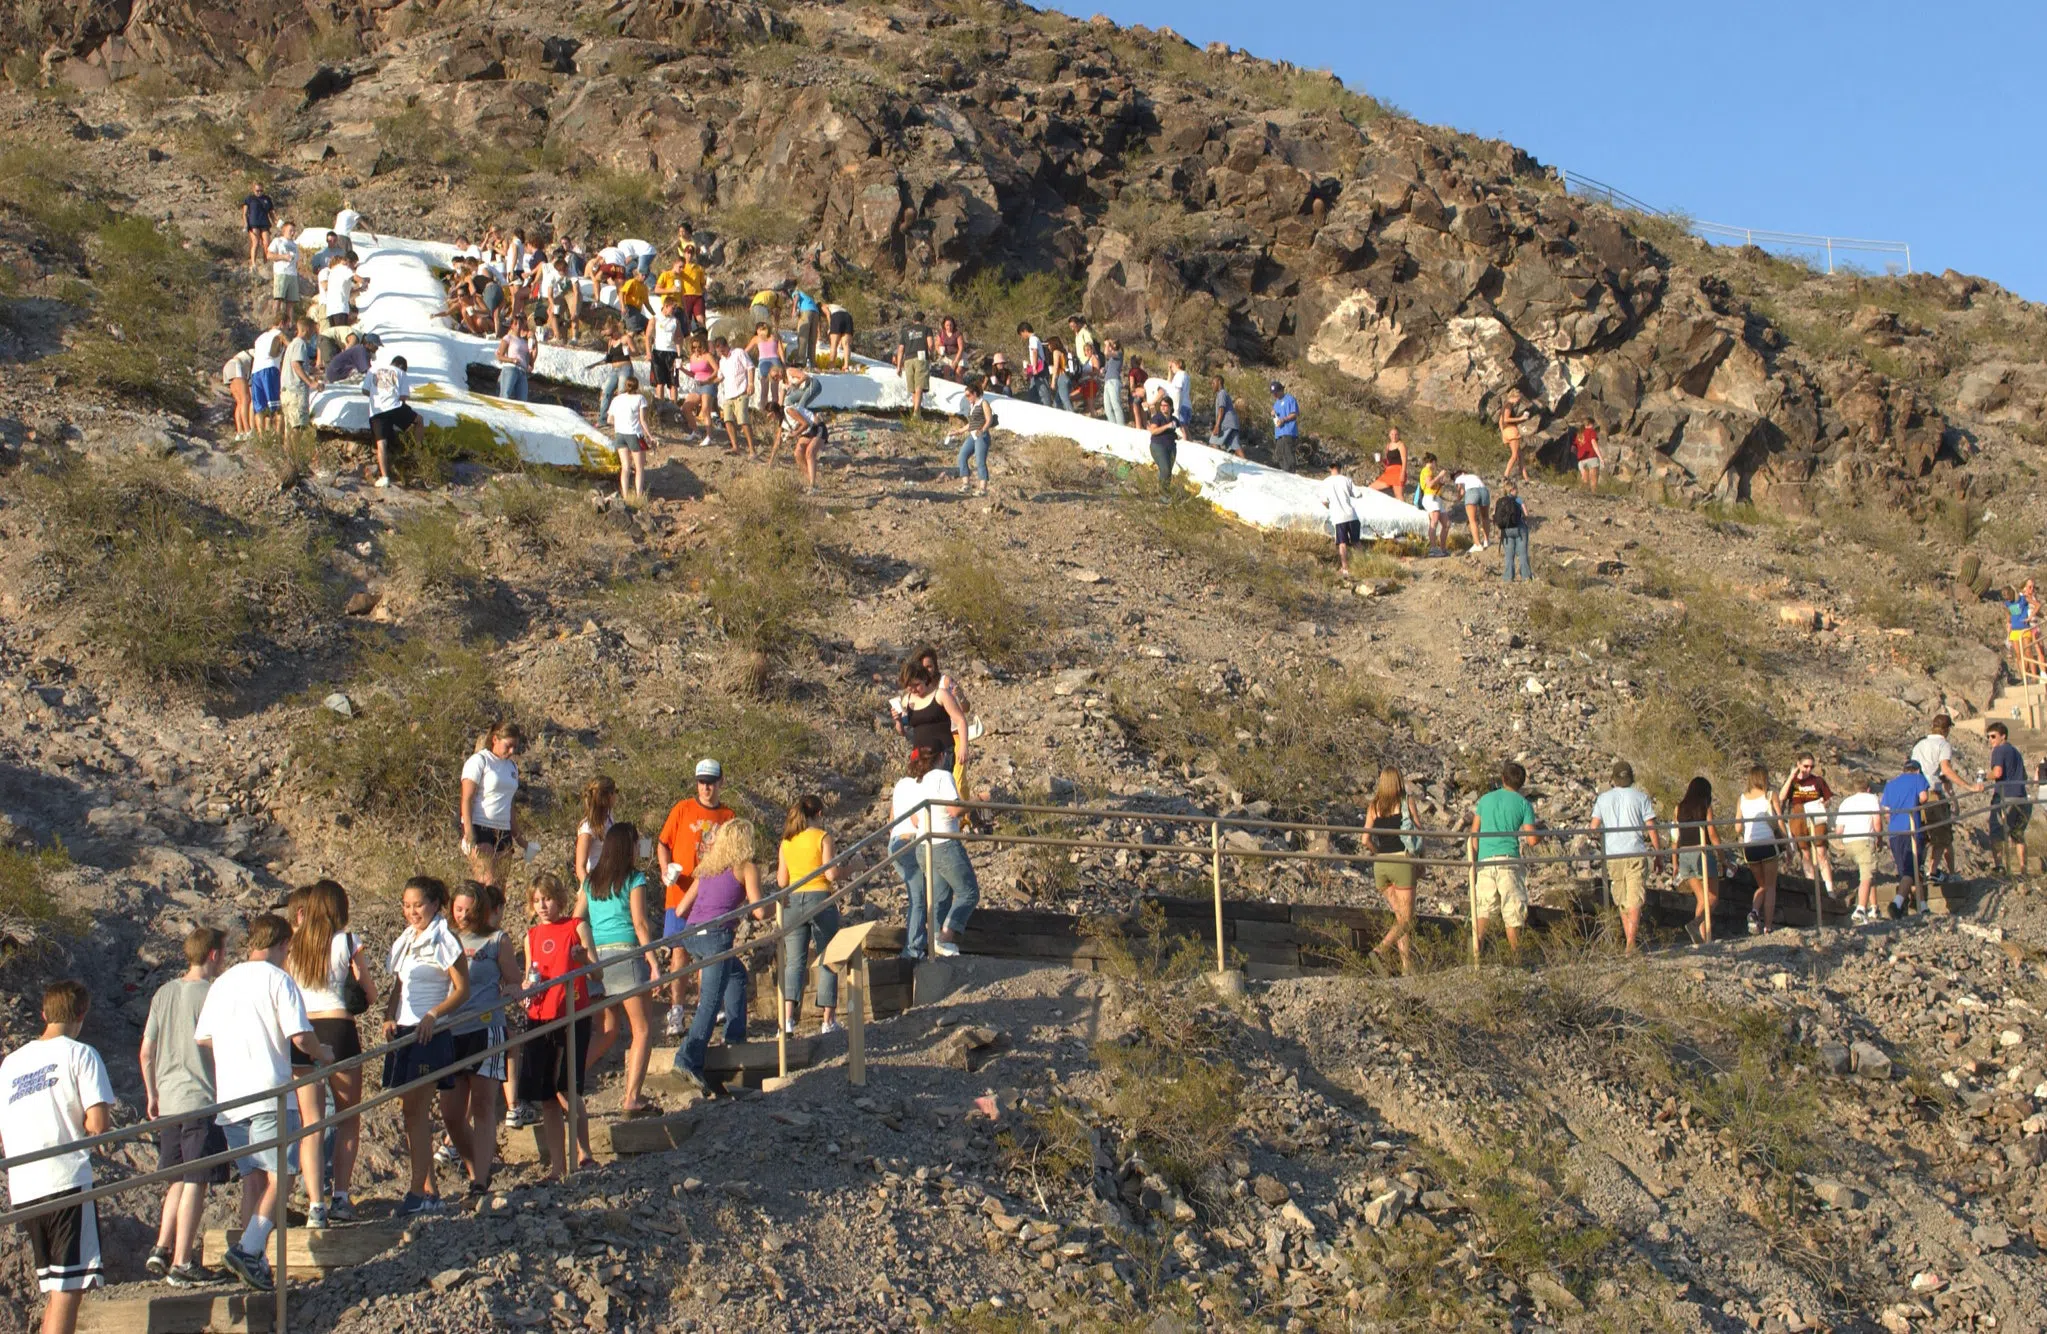 A line of students painting the "A" on "A" mountain white.